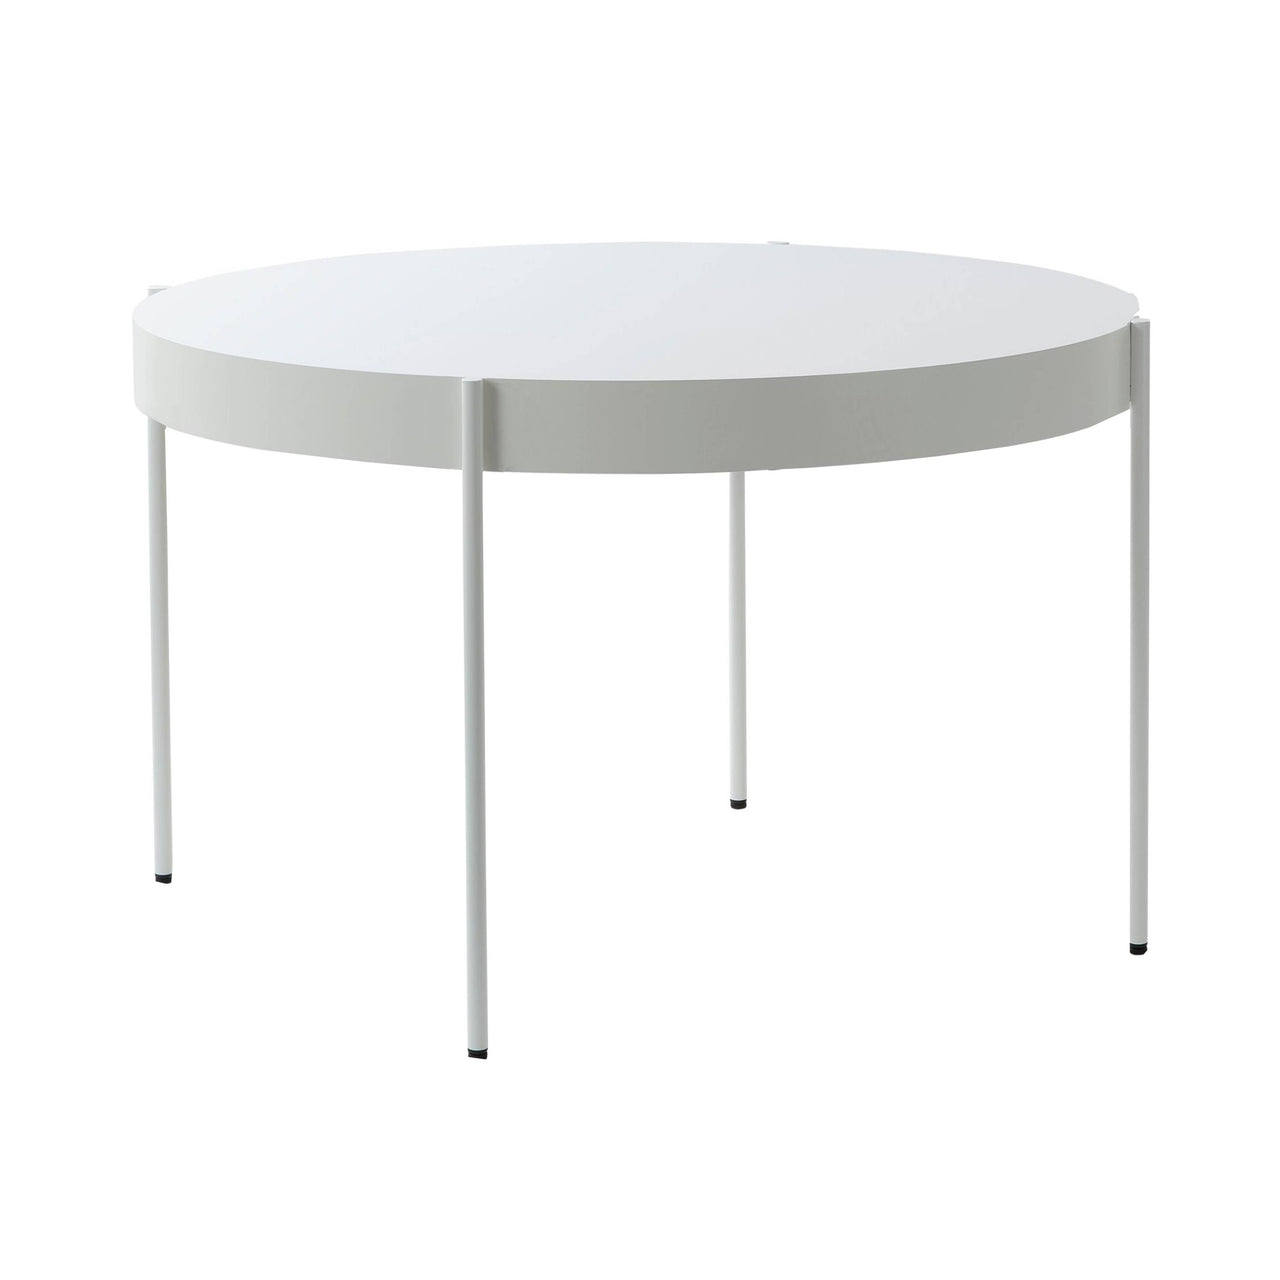 Series 430 Table: Large - 63